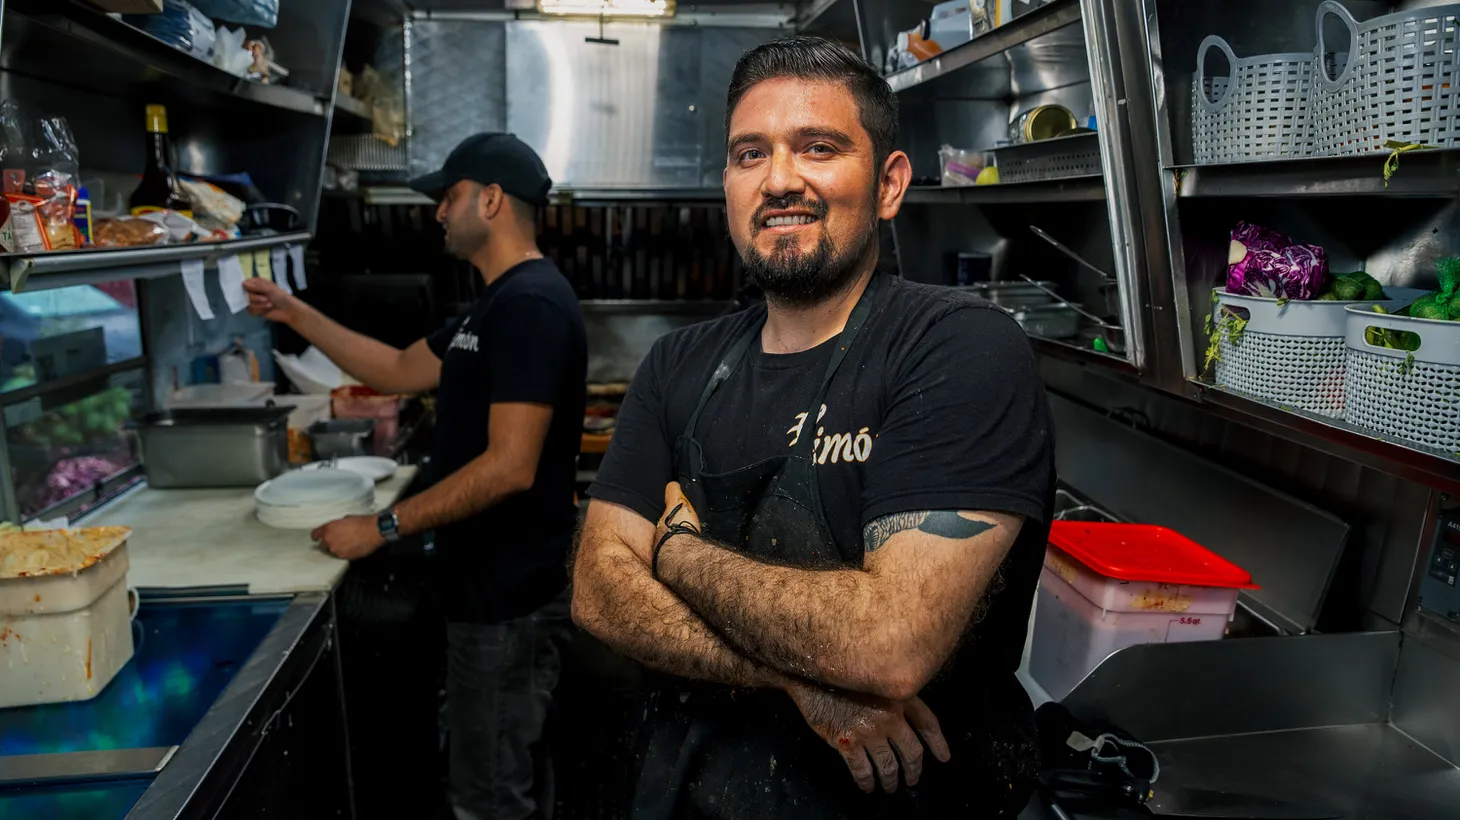 With a background in fine dining, Francisco Aguilar opened Simón, a mariscos truck that parks along Sunset Triangle Plaza in Silver Lake.